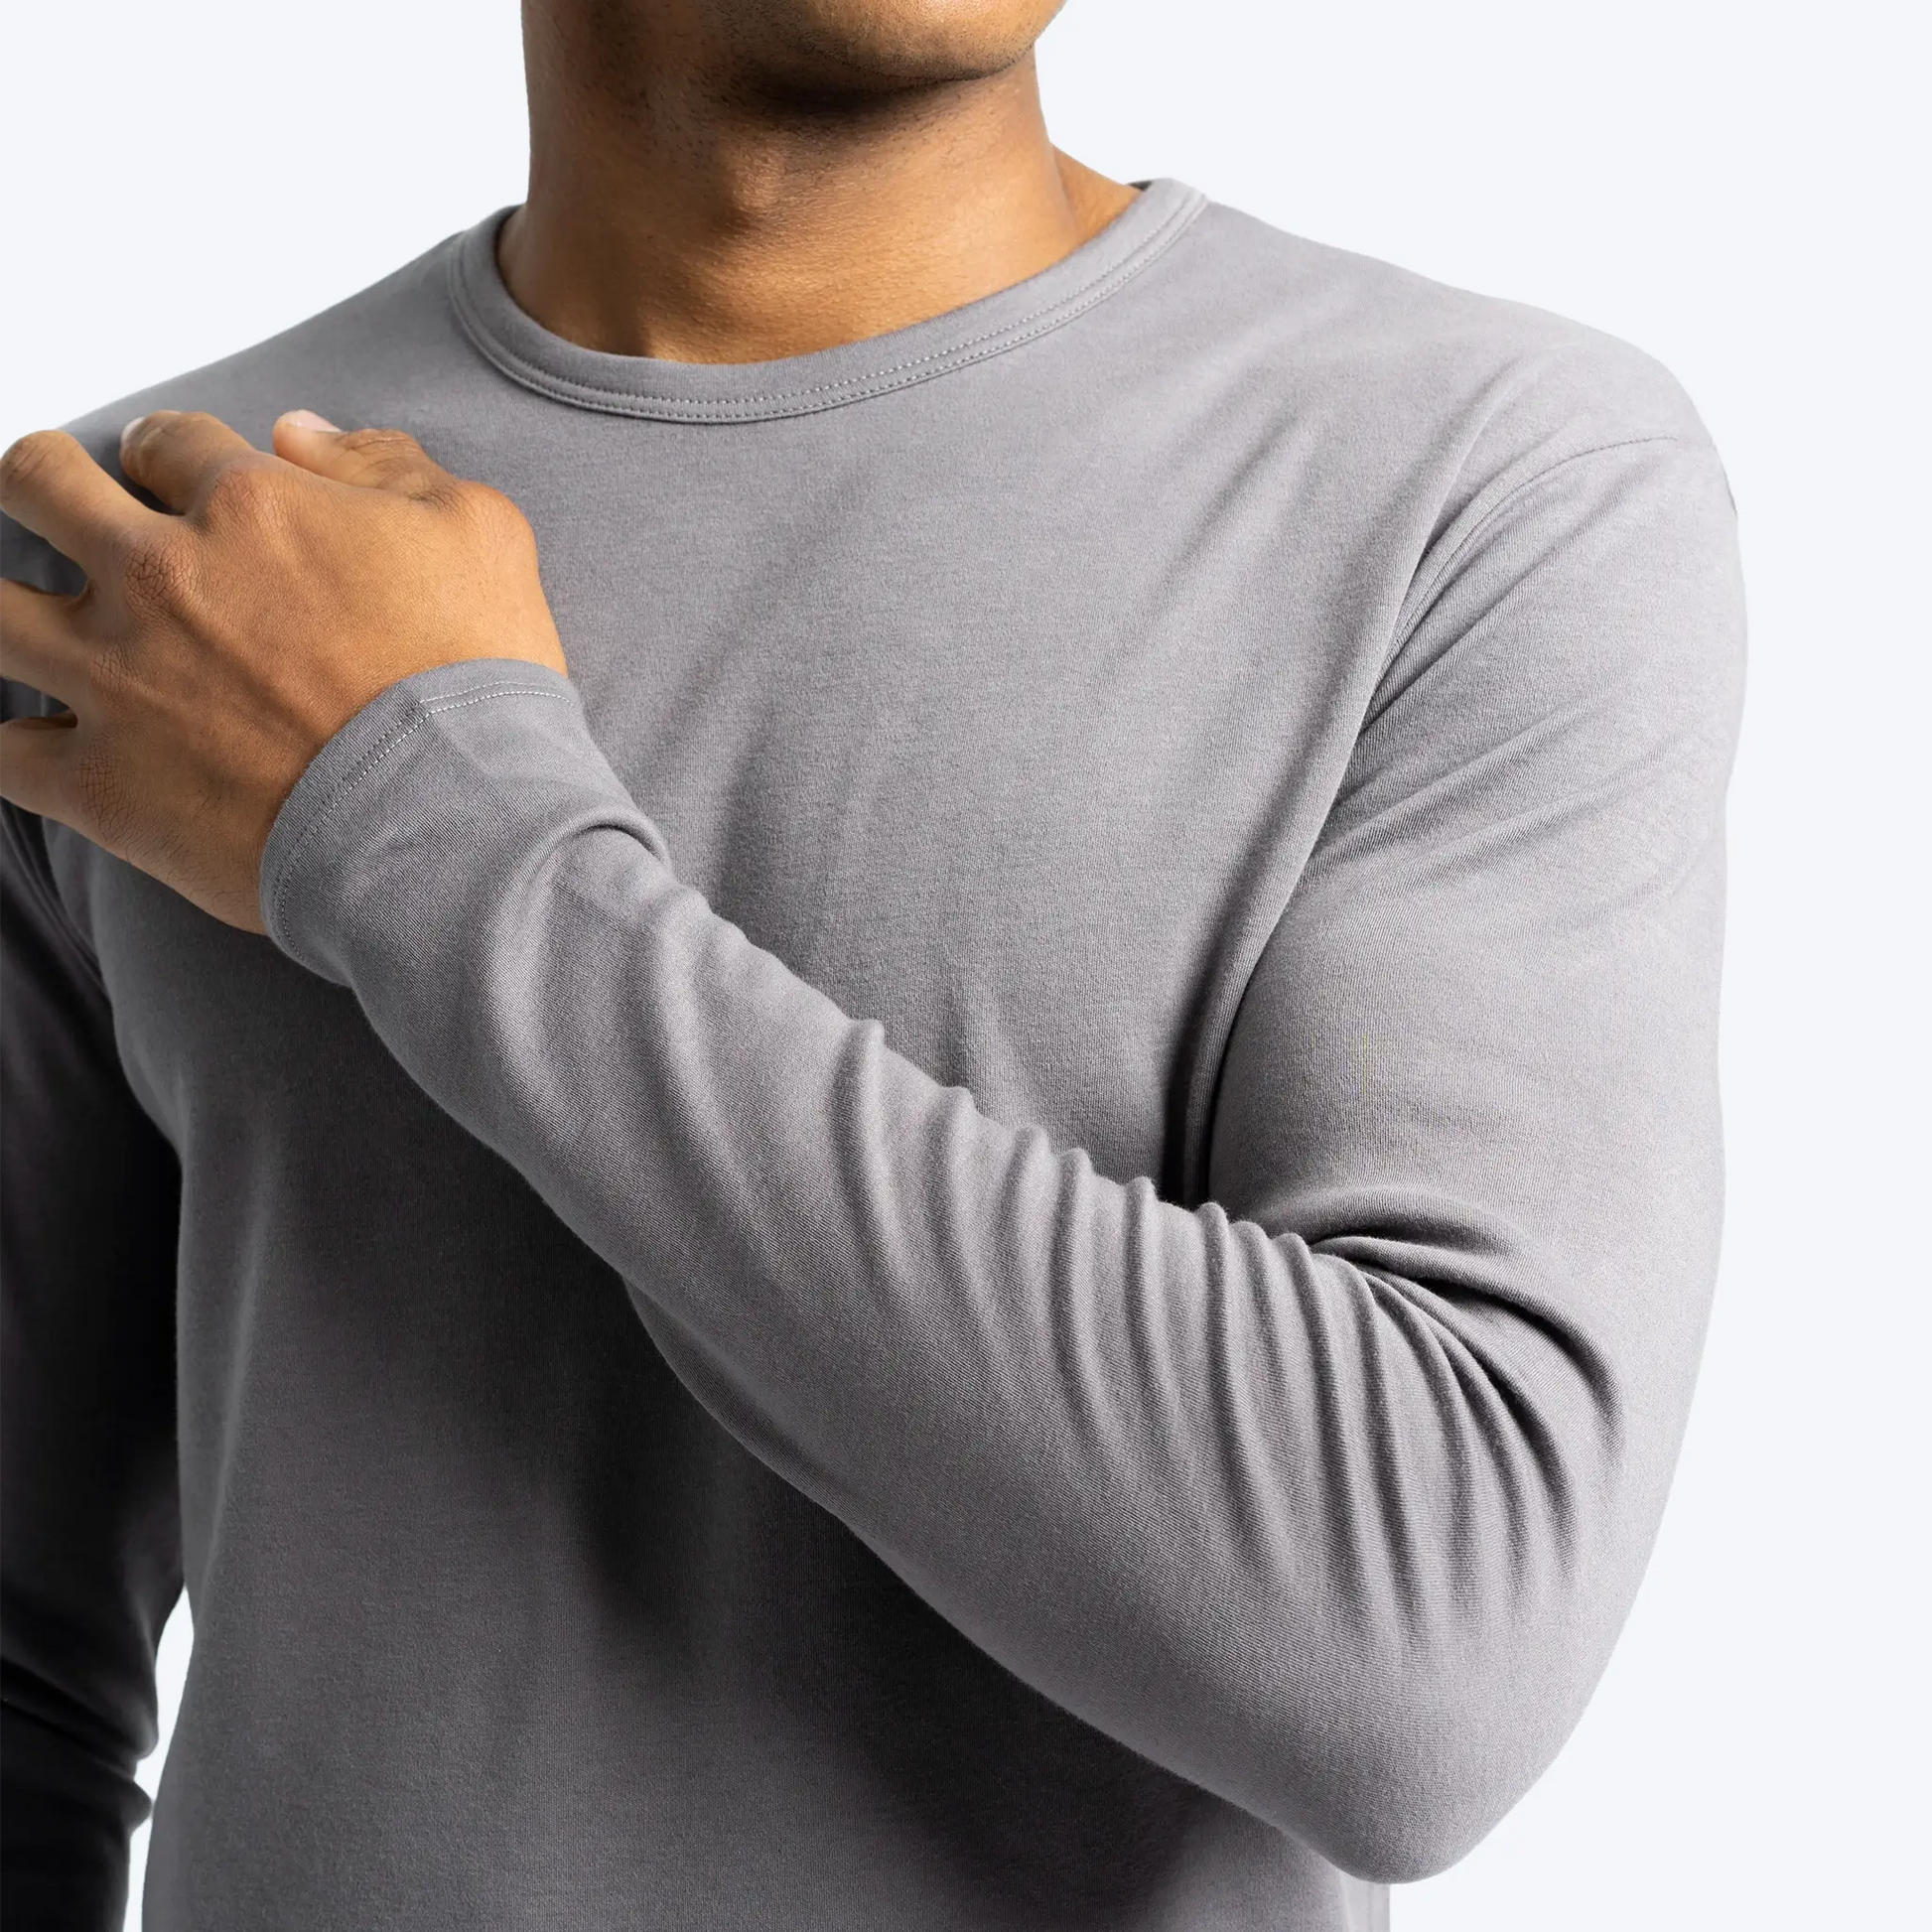 mens hypoallergenic tshirt long sleeve color natural gray